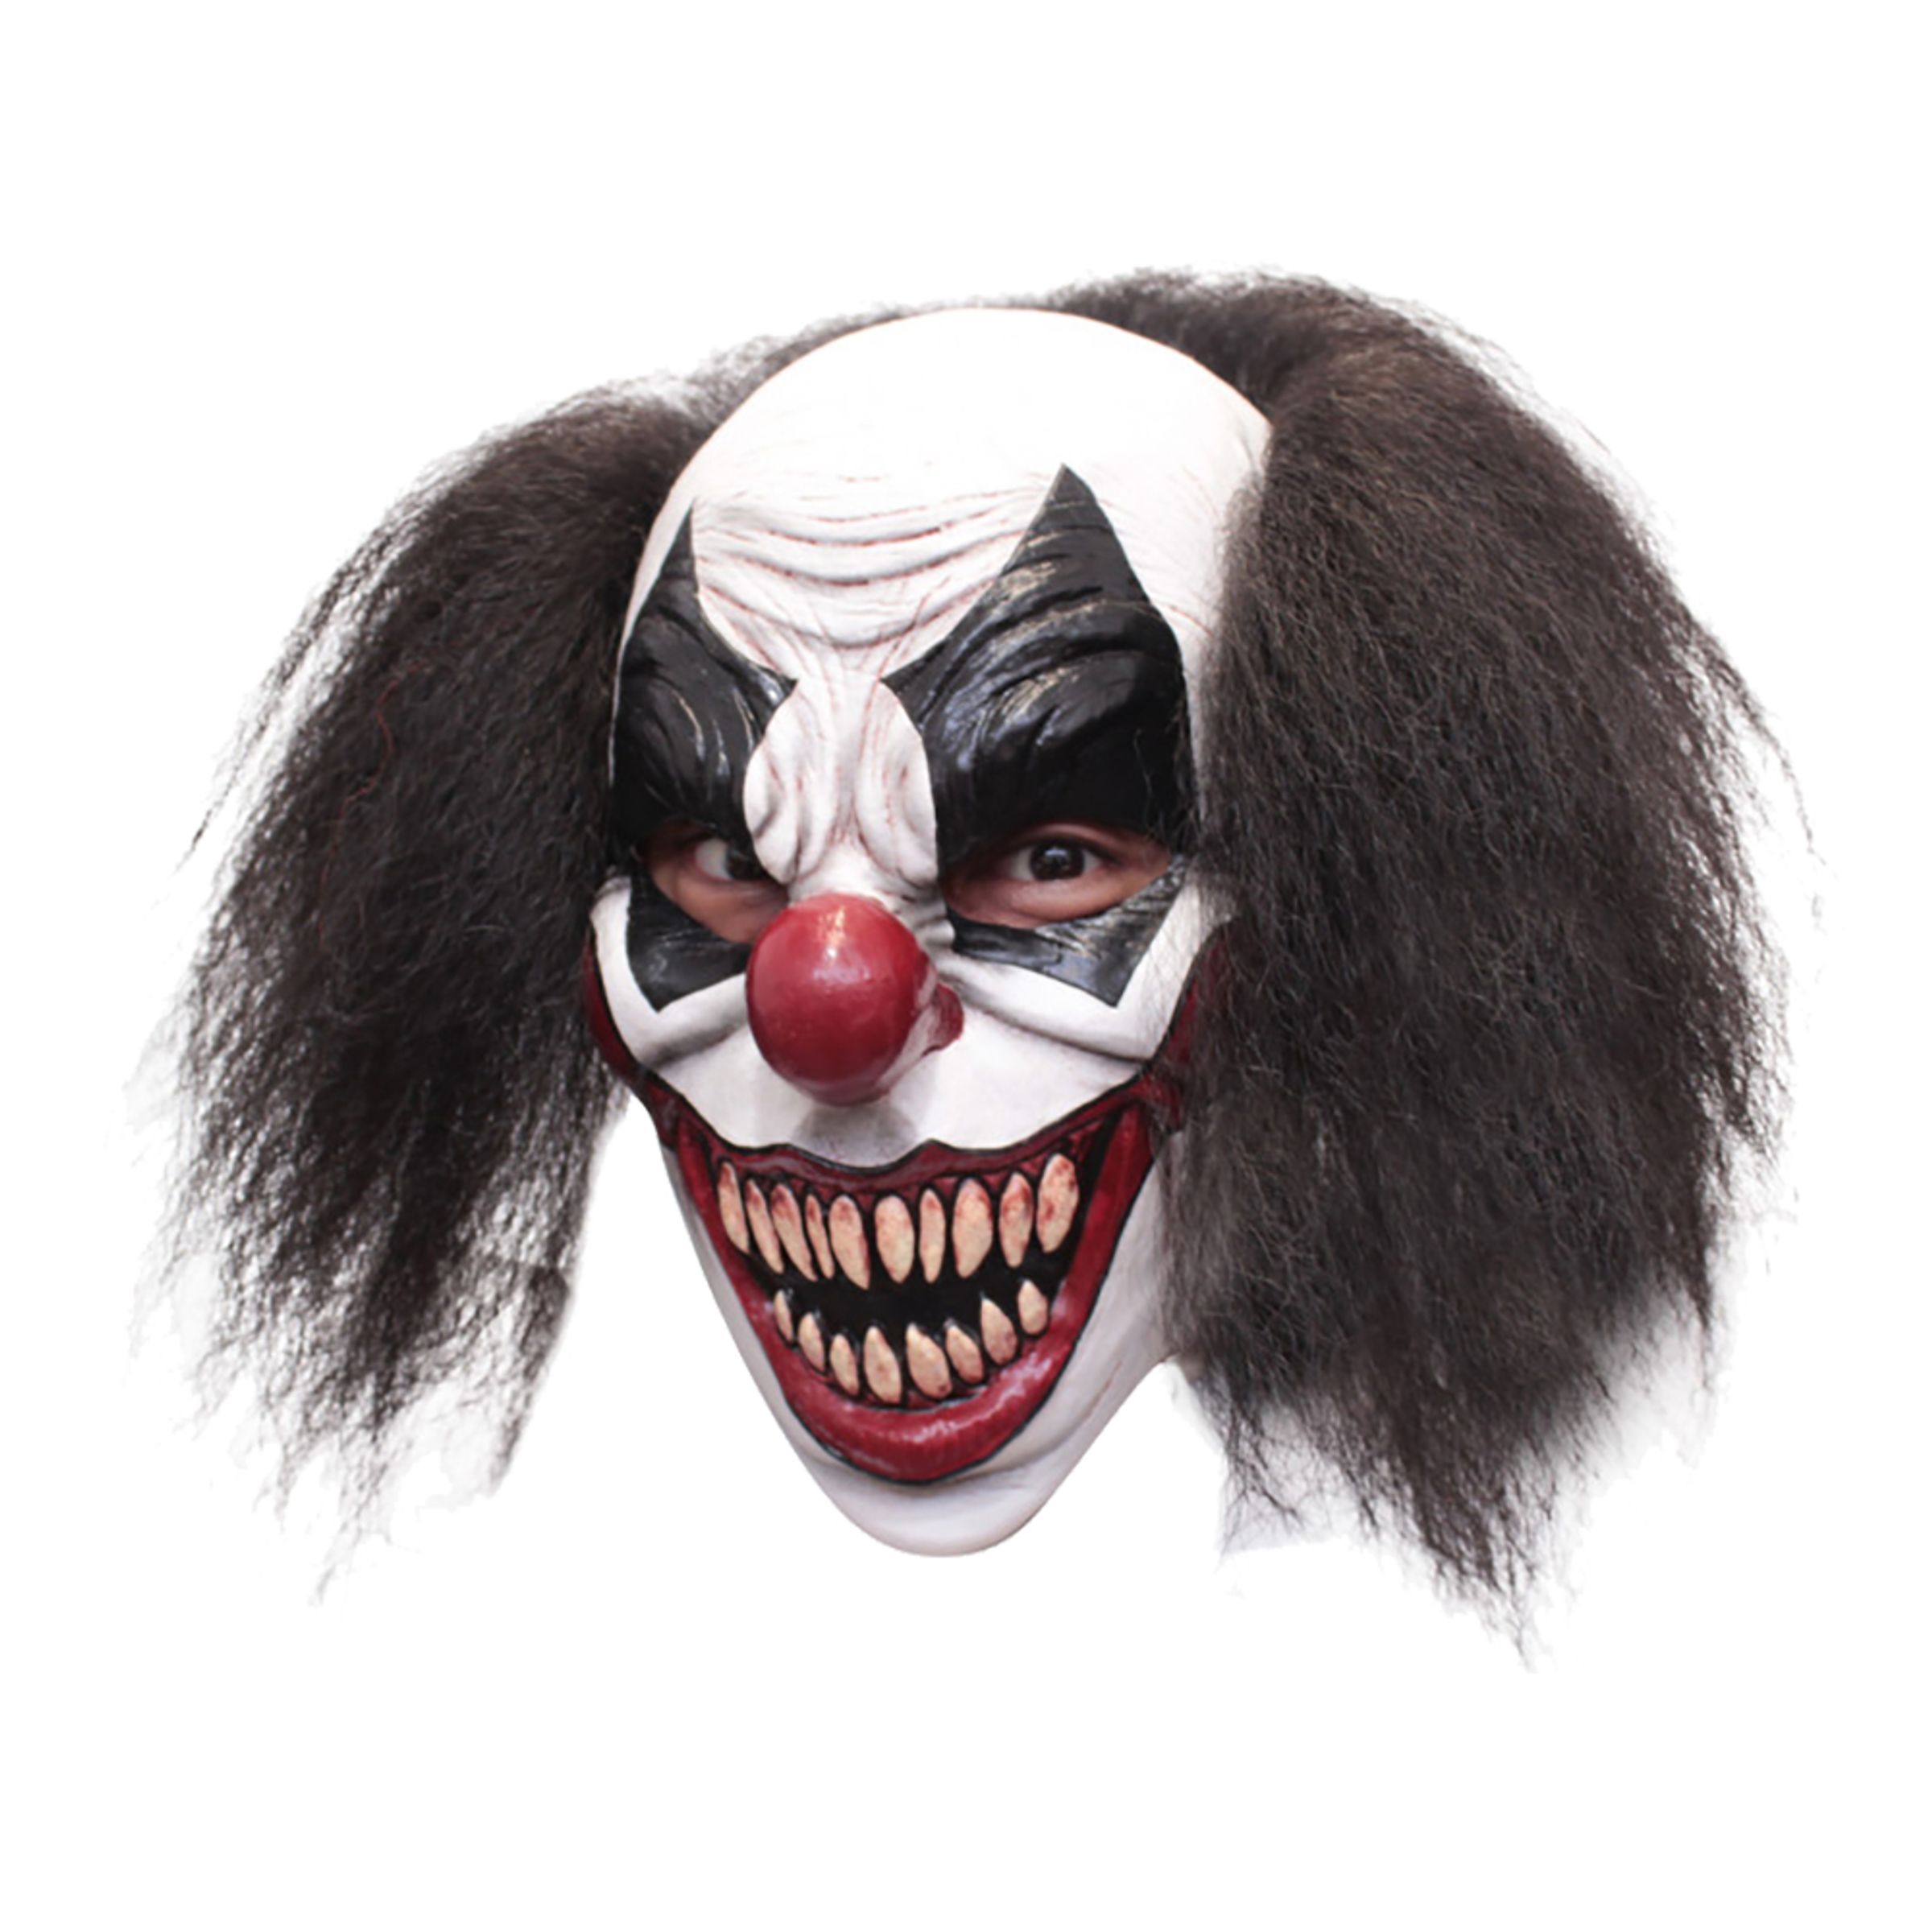 Darky the Clown Mask - One size